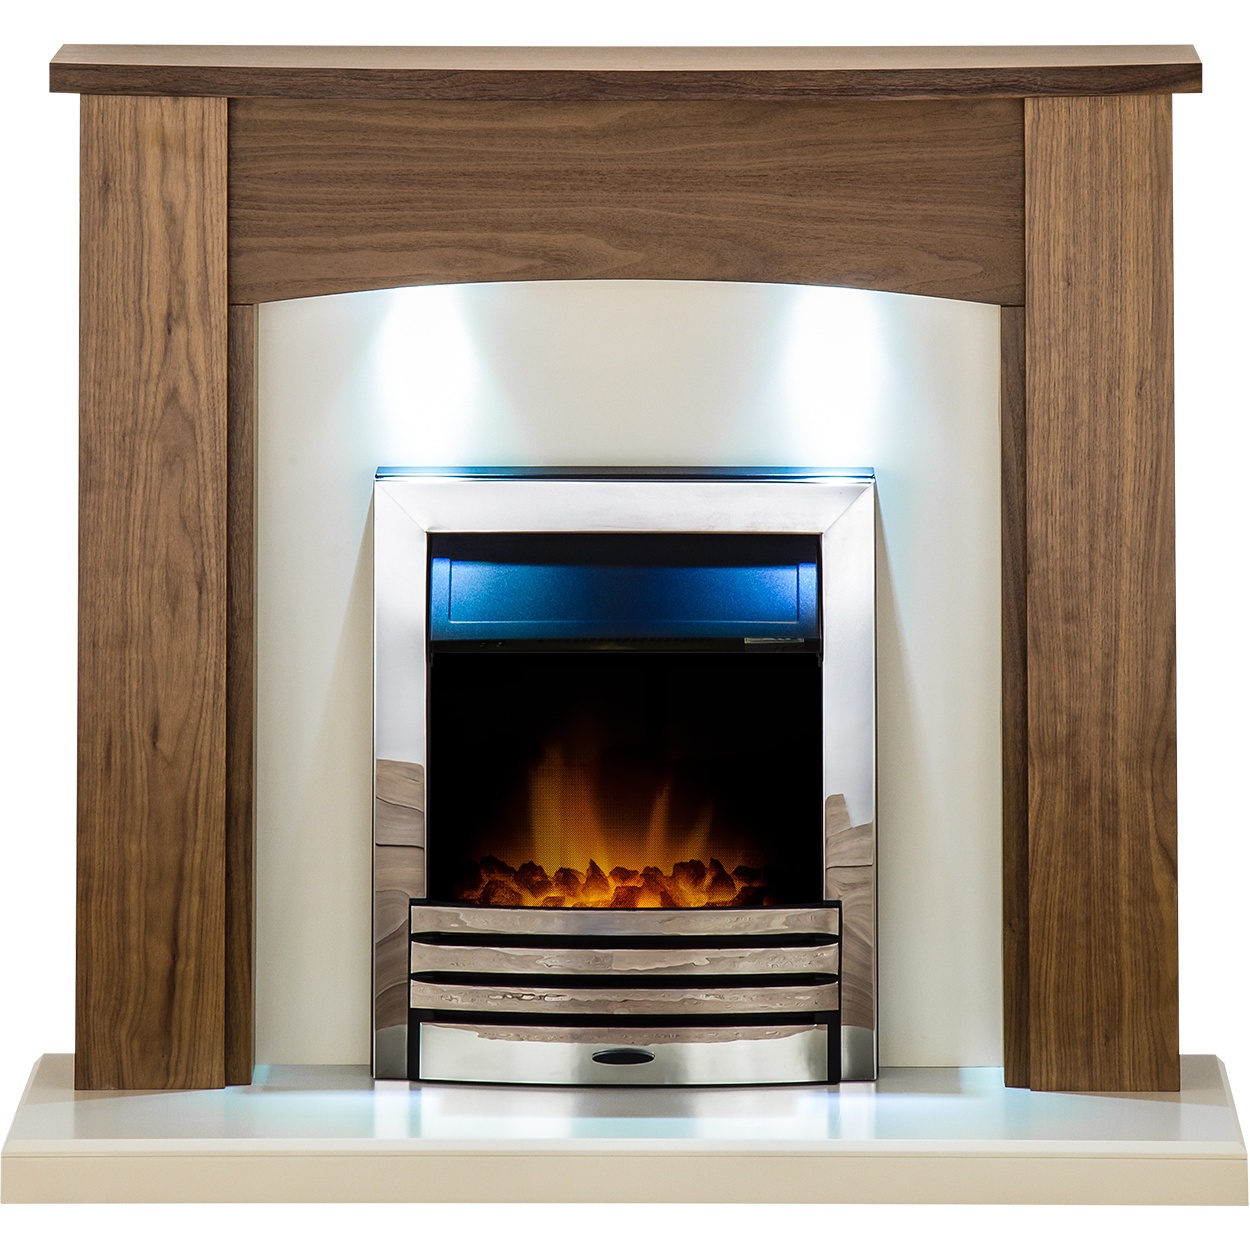 adam stanford fireplace suite in walnut with eclipse electric fire in chrome and downlights 48 inch